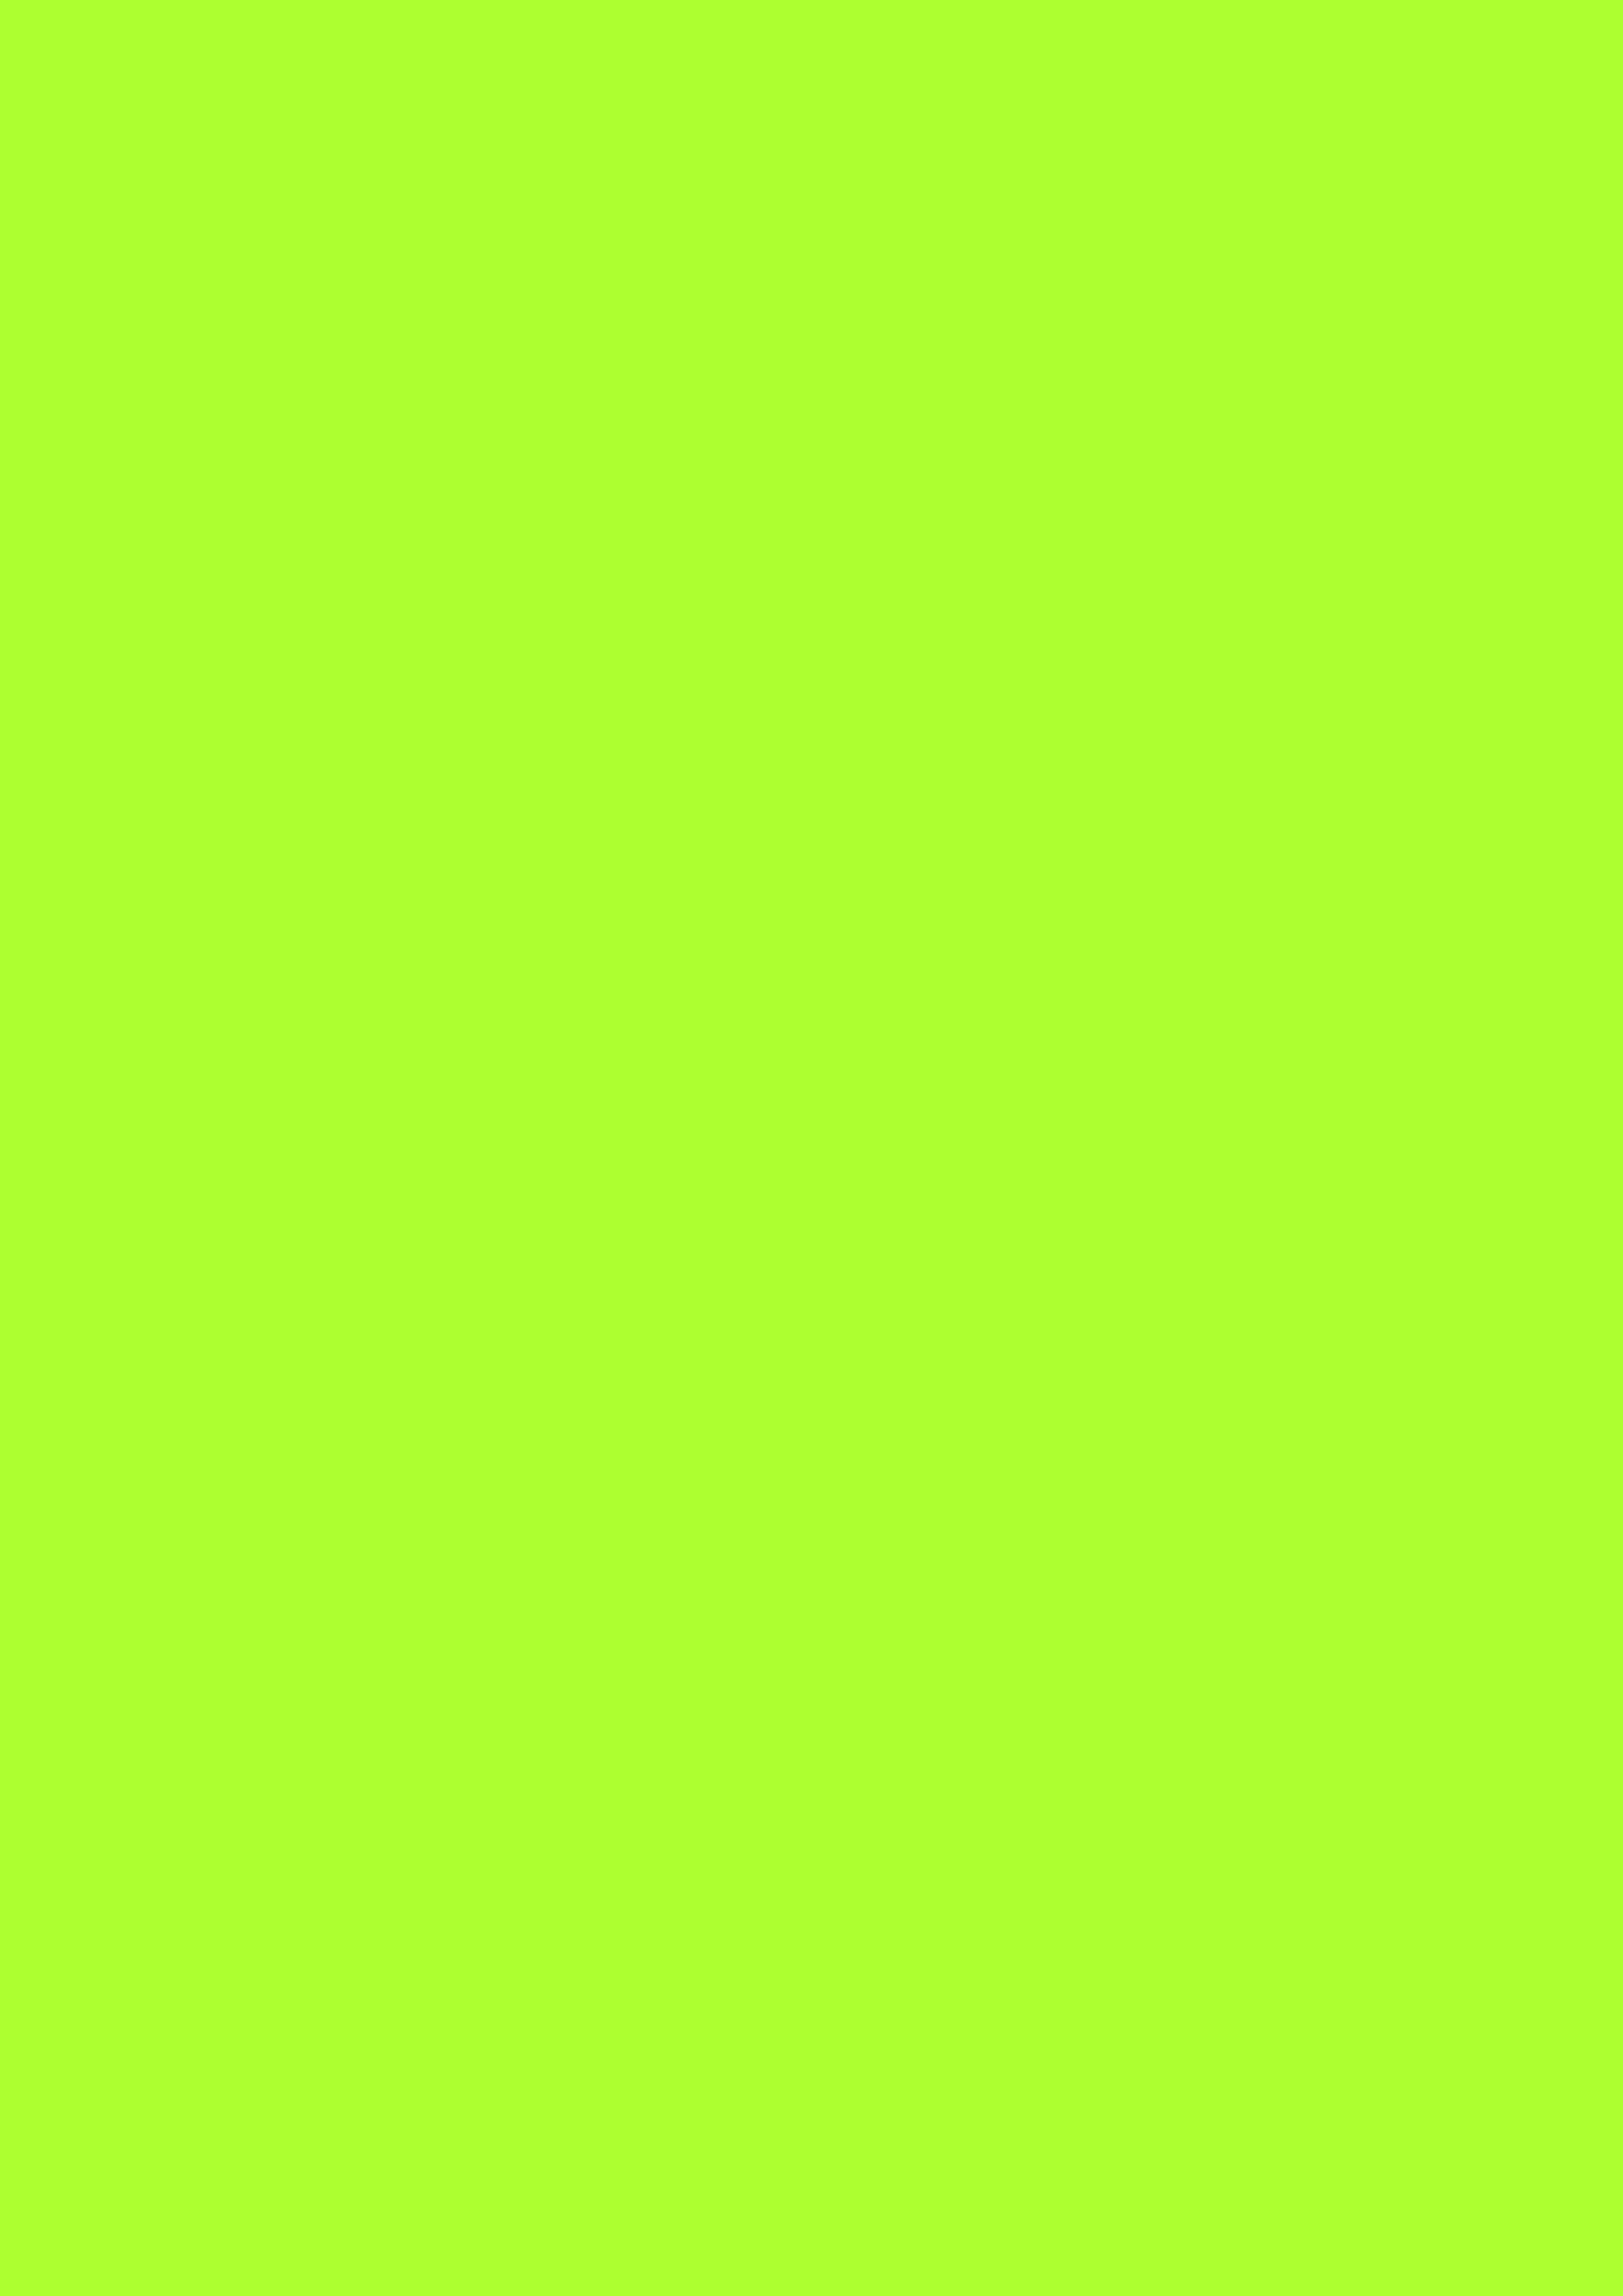 2480x3508 Green-yellow Solid Color Background